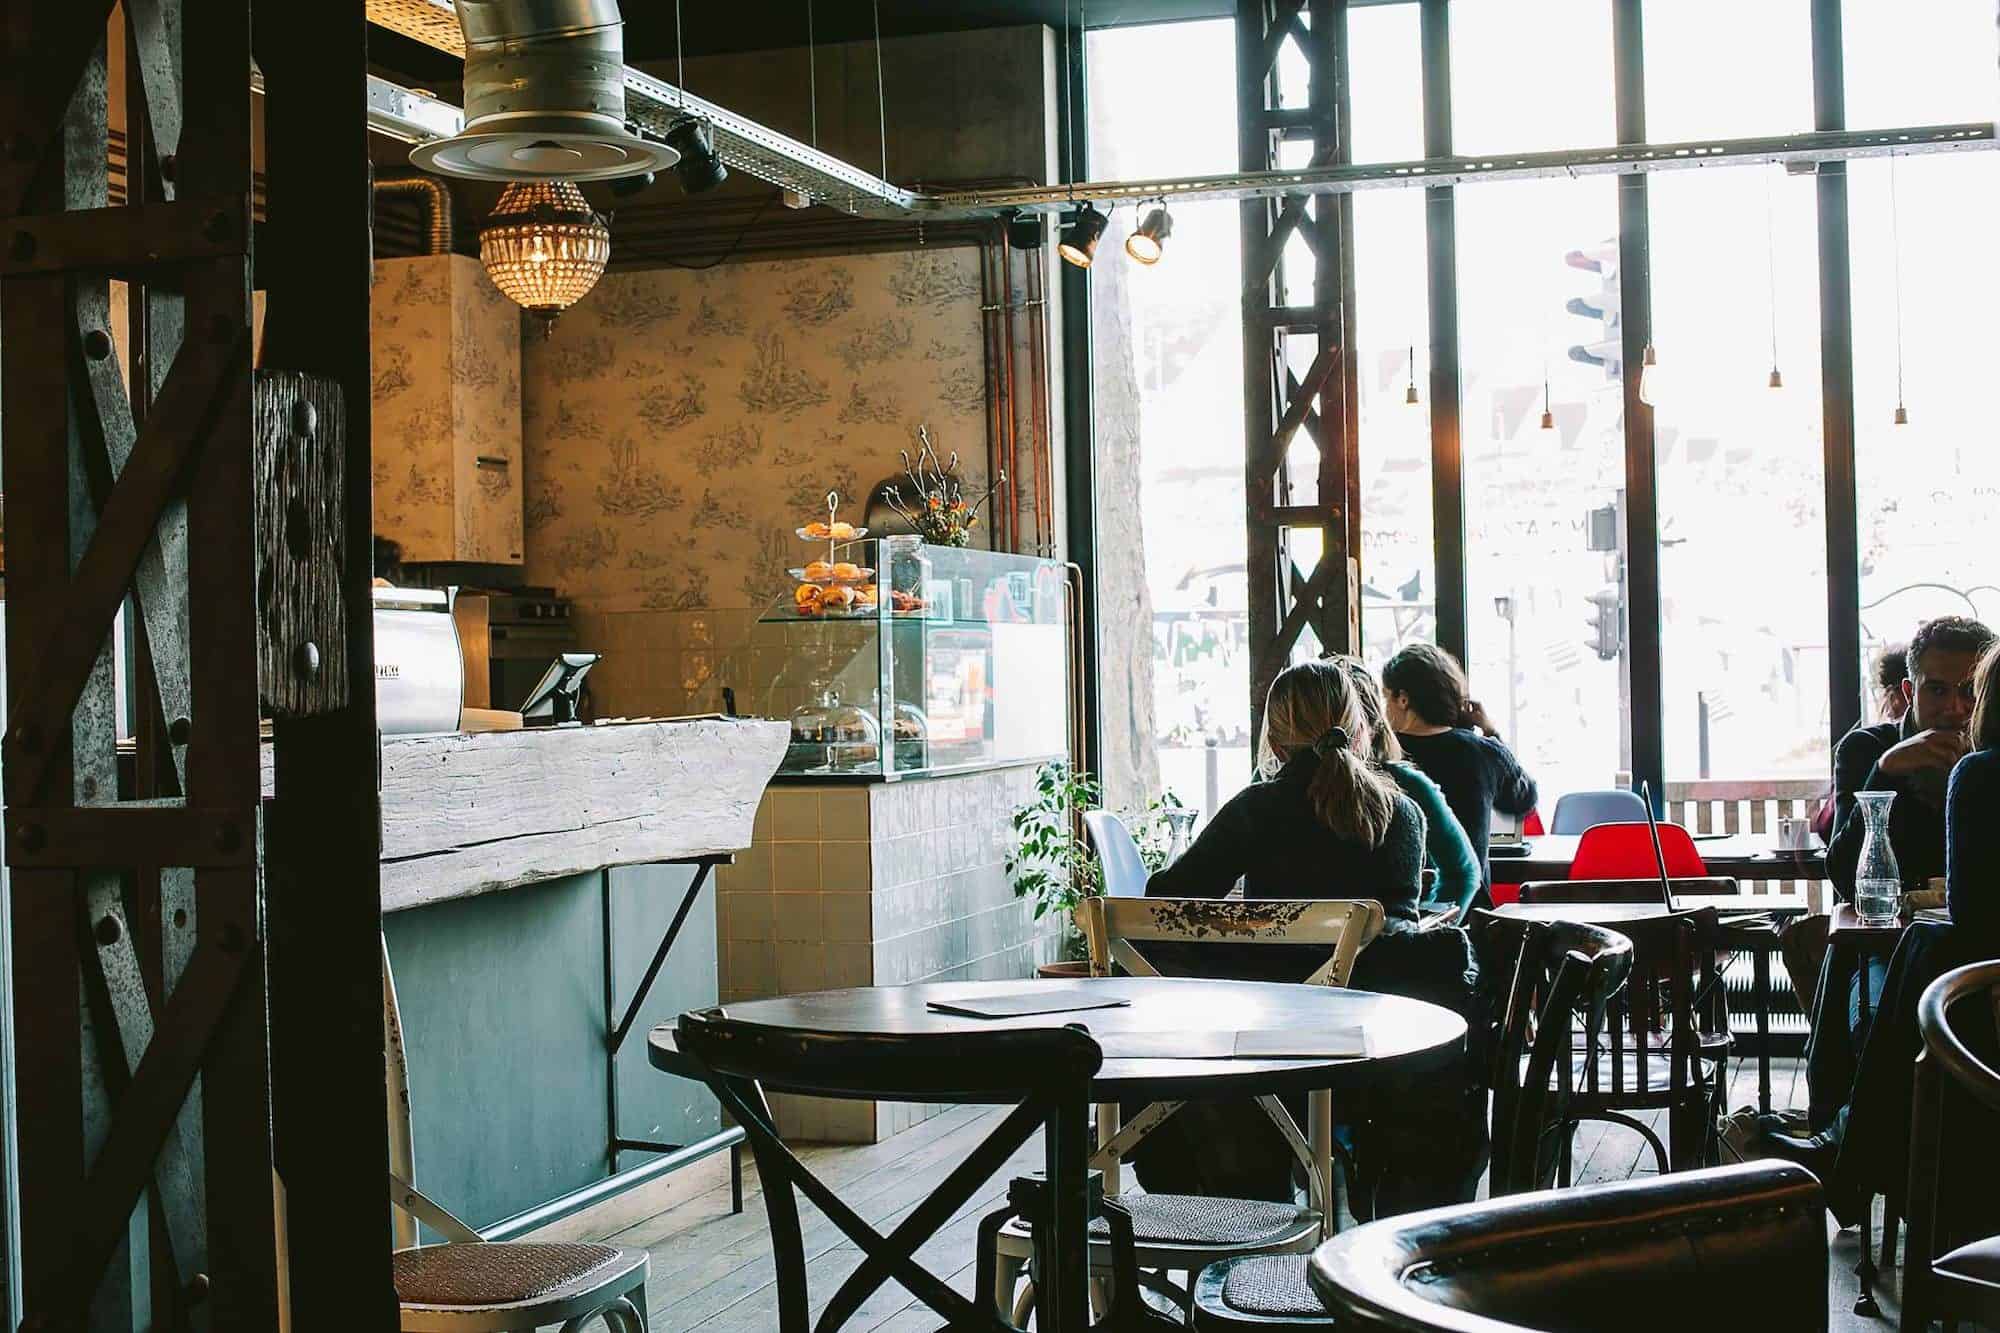 Inside Paris gluten-free coffee shop Lomi and its exposed brick walls and distressed wooden chairs.